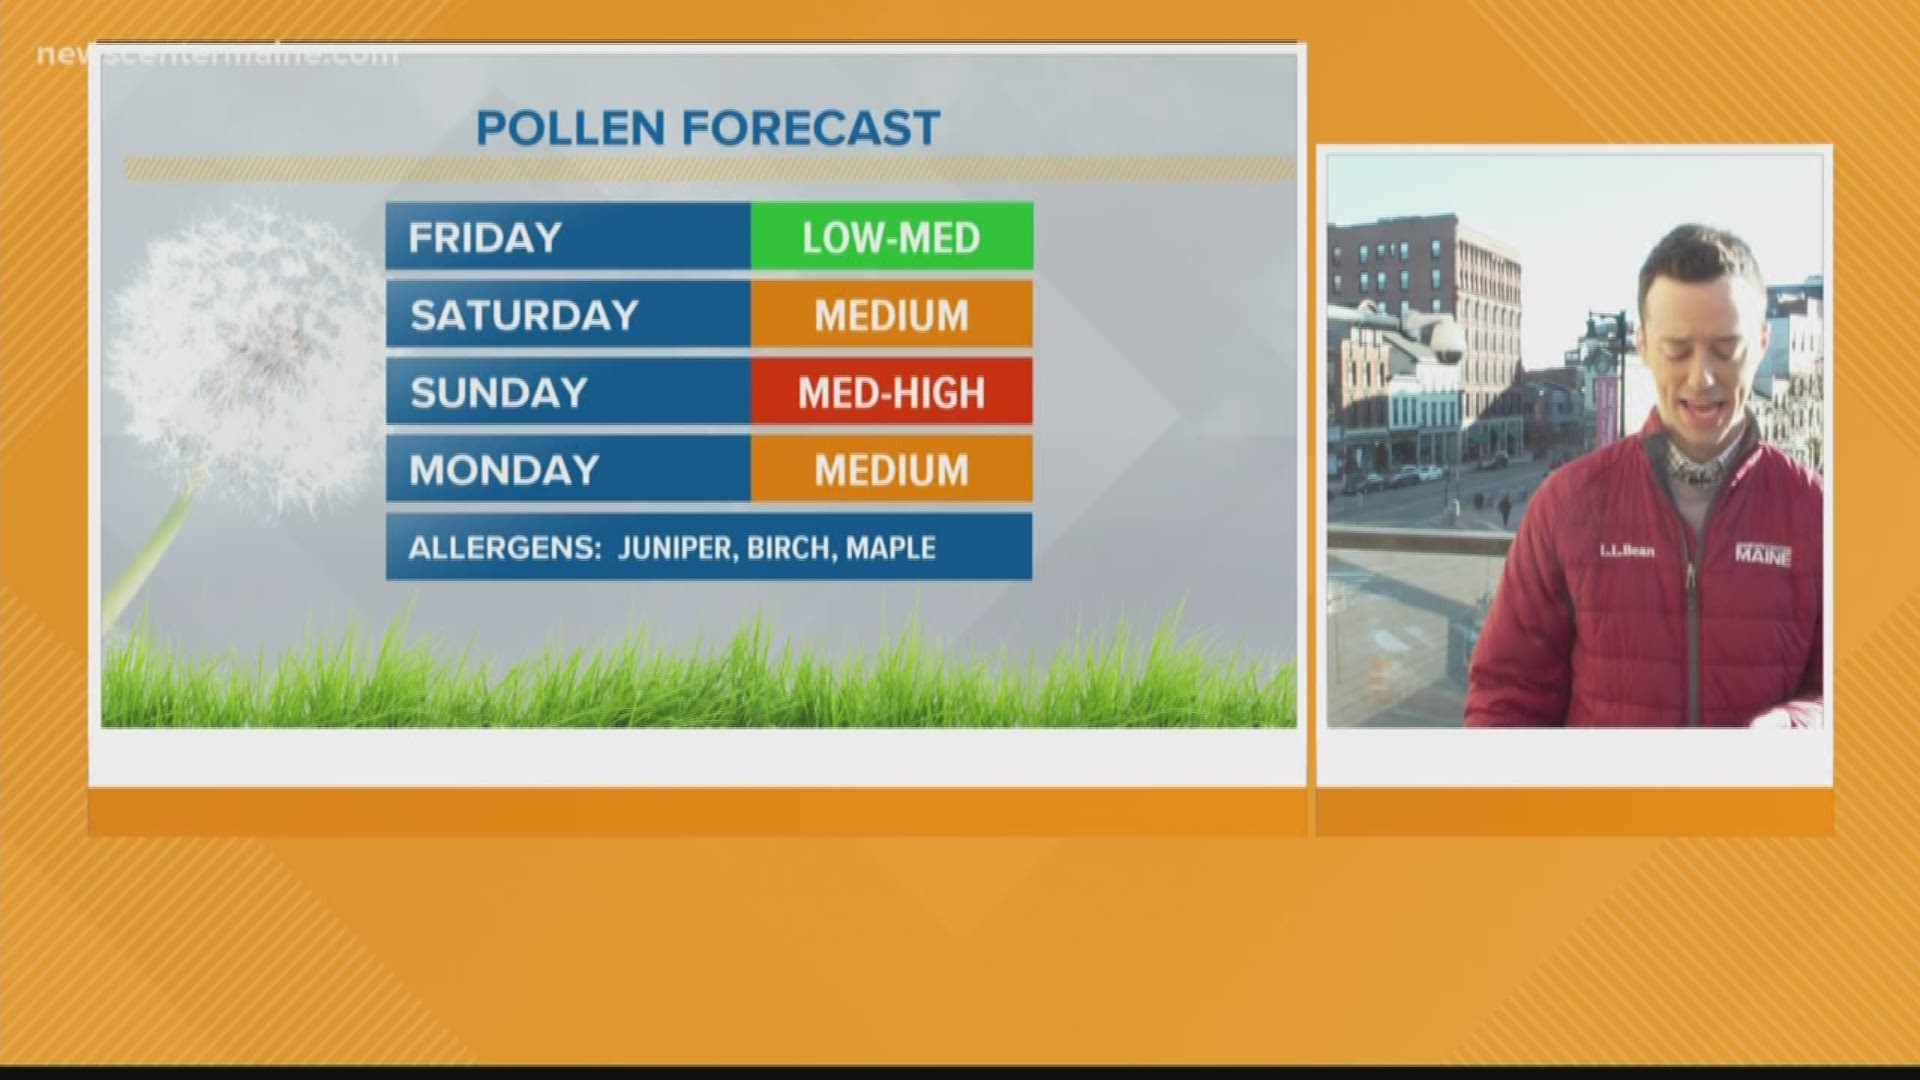 Along with the good weather comes rising pollen levels. Cory Froomkin breaks down the coming weekend pollen count.